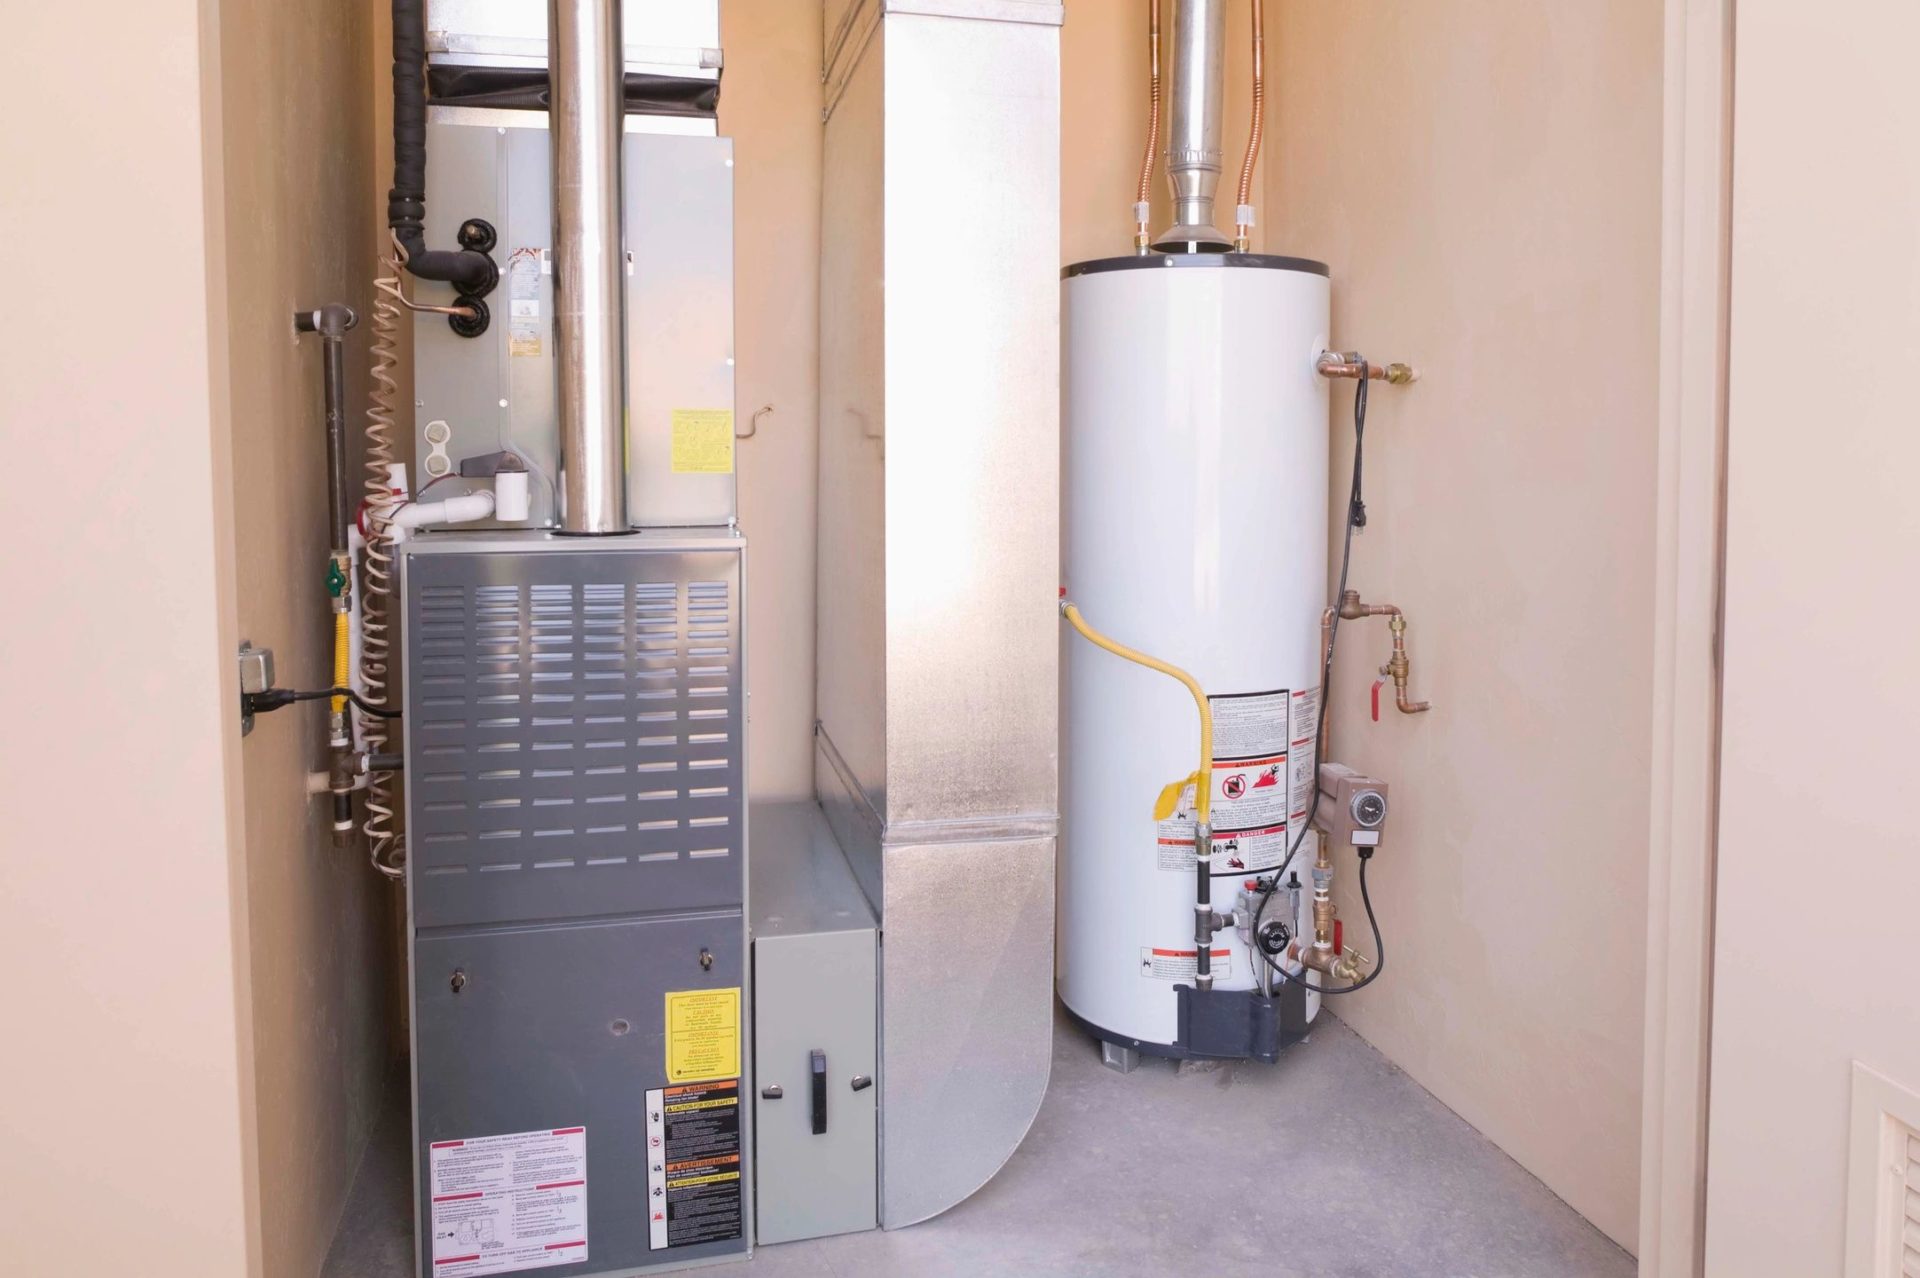 A gas furnace and water heater in the corner of a room.